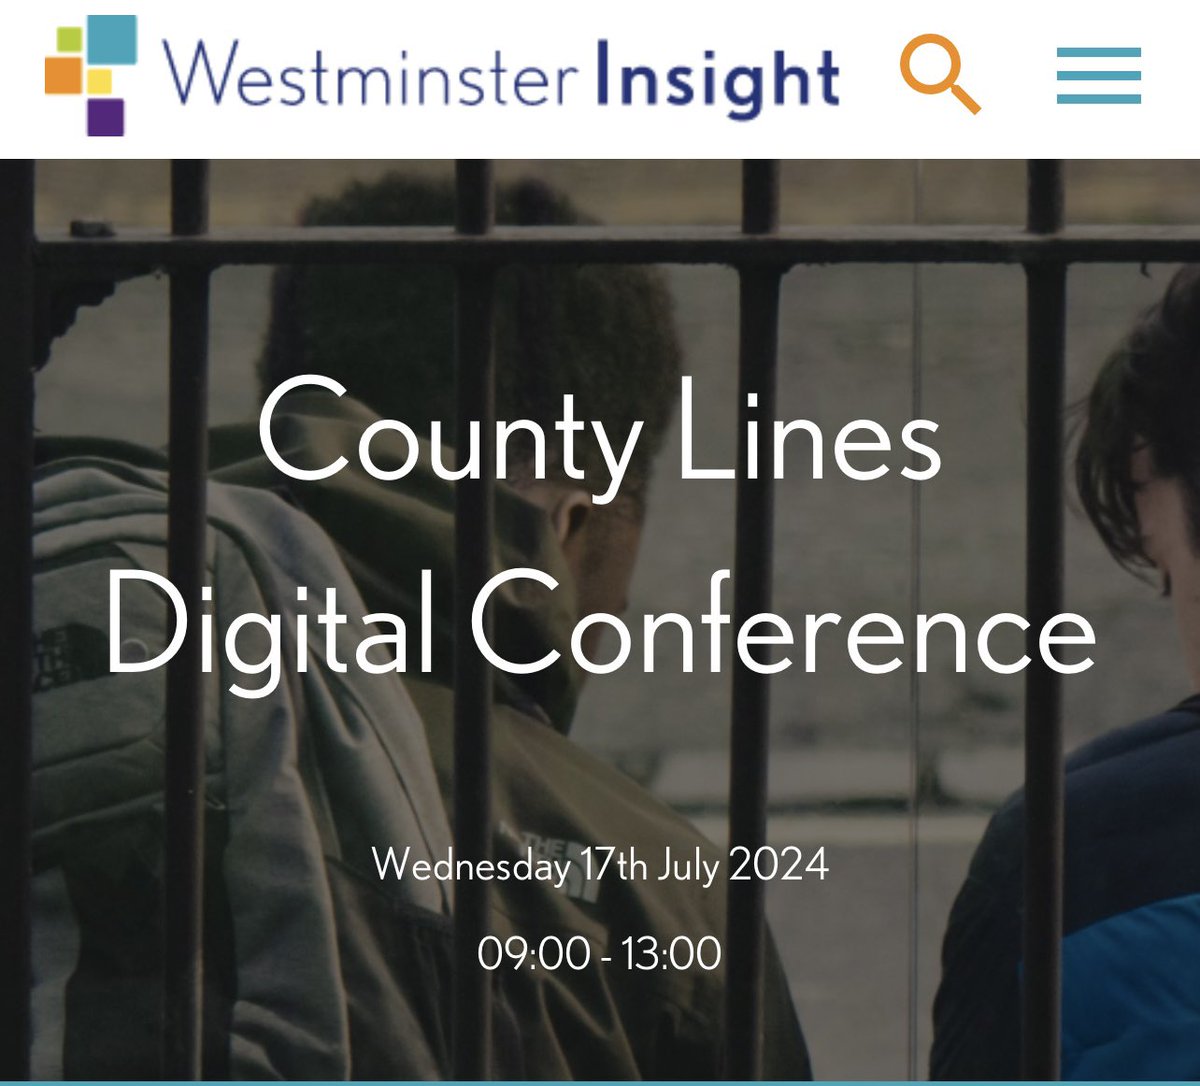 Addressing #countylines is a multifaceted challenge. I’m joining a panel of respected and knowledgeable speakers to discuss the beneficial outcomes of my efforts in early intervention and prevention. Early bird discount ends on 31st May. westminsterinsight.com/conferences-an… @WMinsightUK